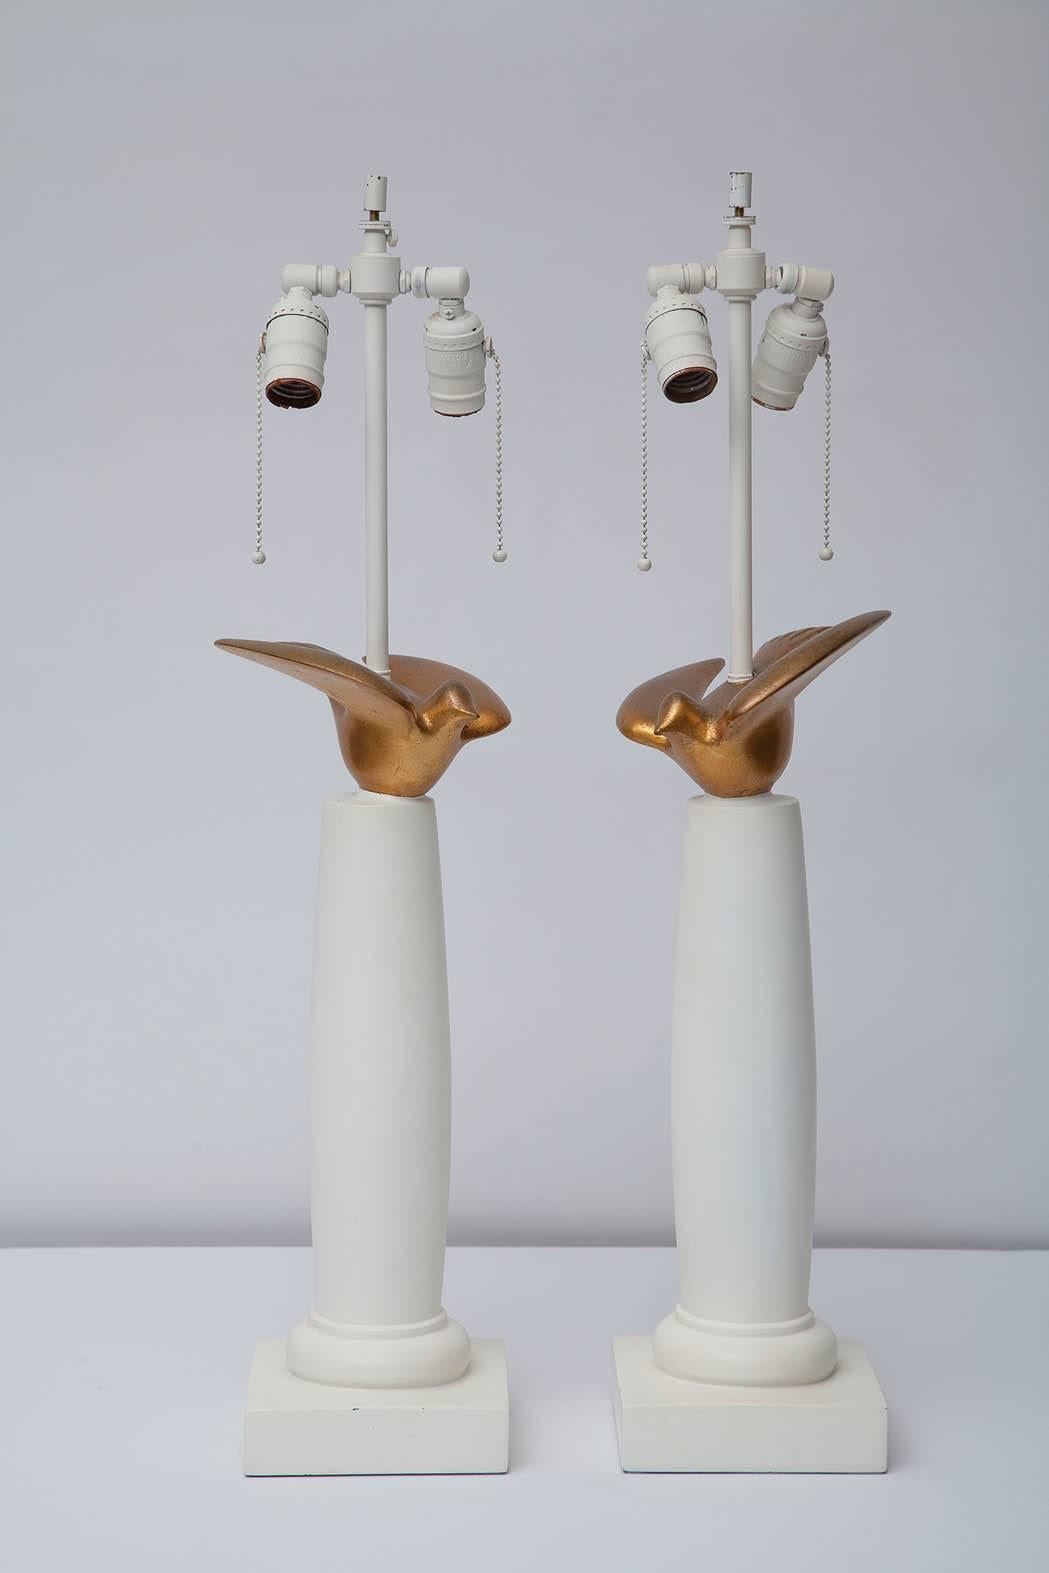 Pair of 70's Sirmos white plaster finish lamps have Doric column bases topped by stylized gold leafed doves.